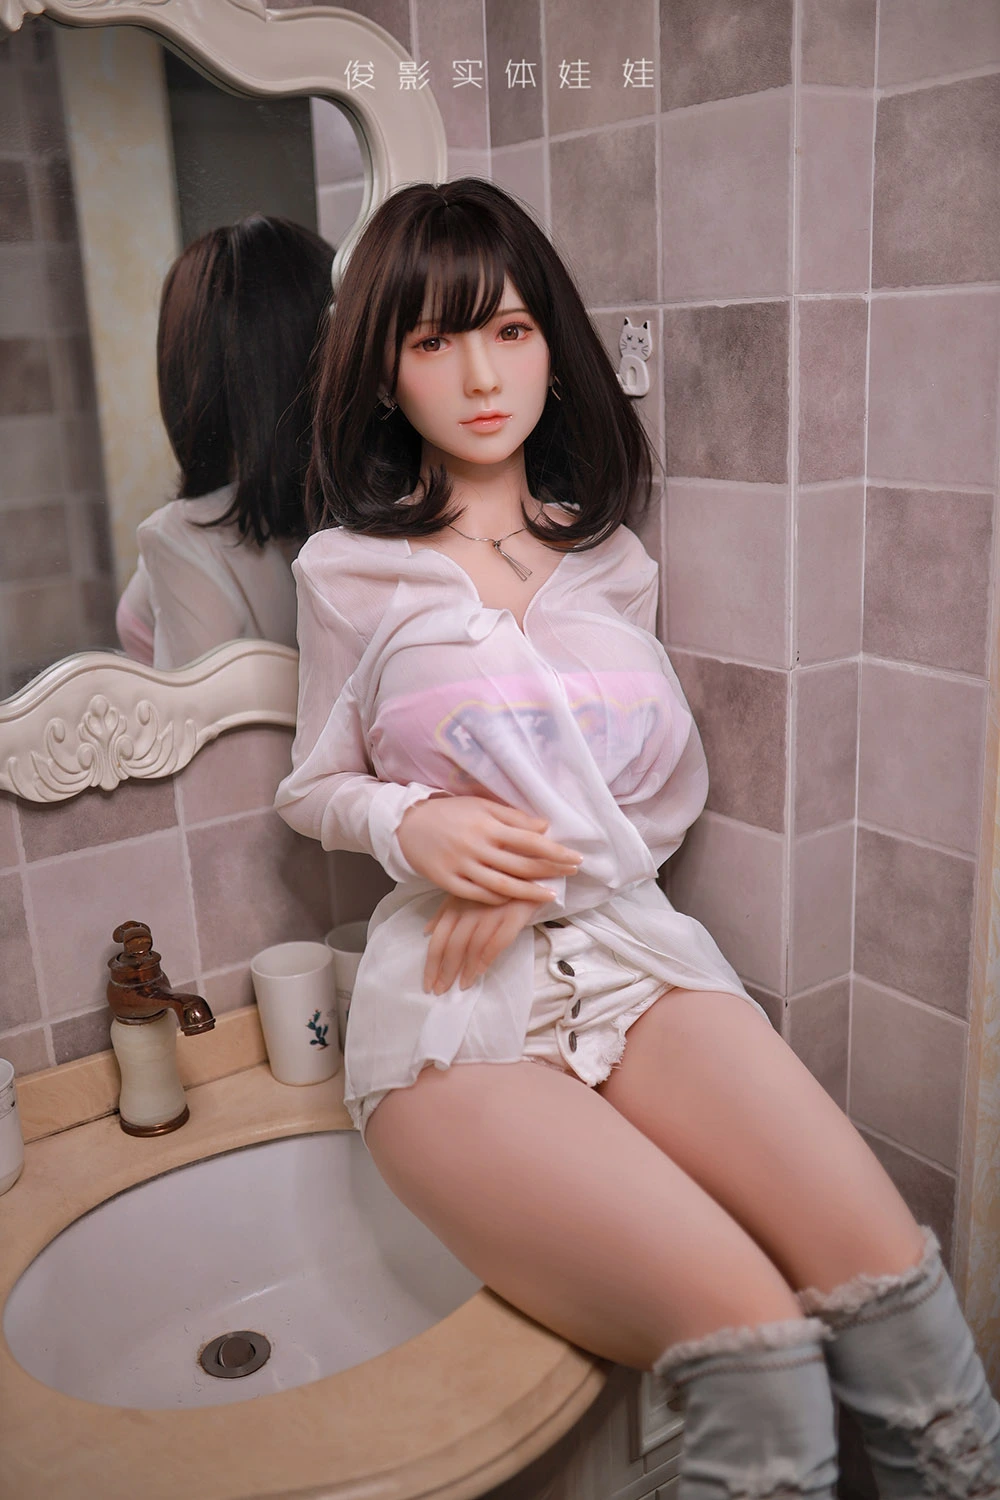 161cm Well-proportioned Seductive Young Virgin Sex Doll Ting Yi